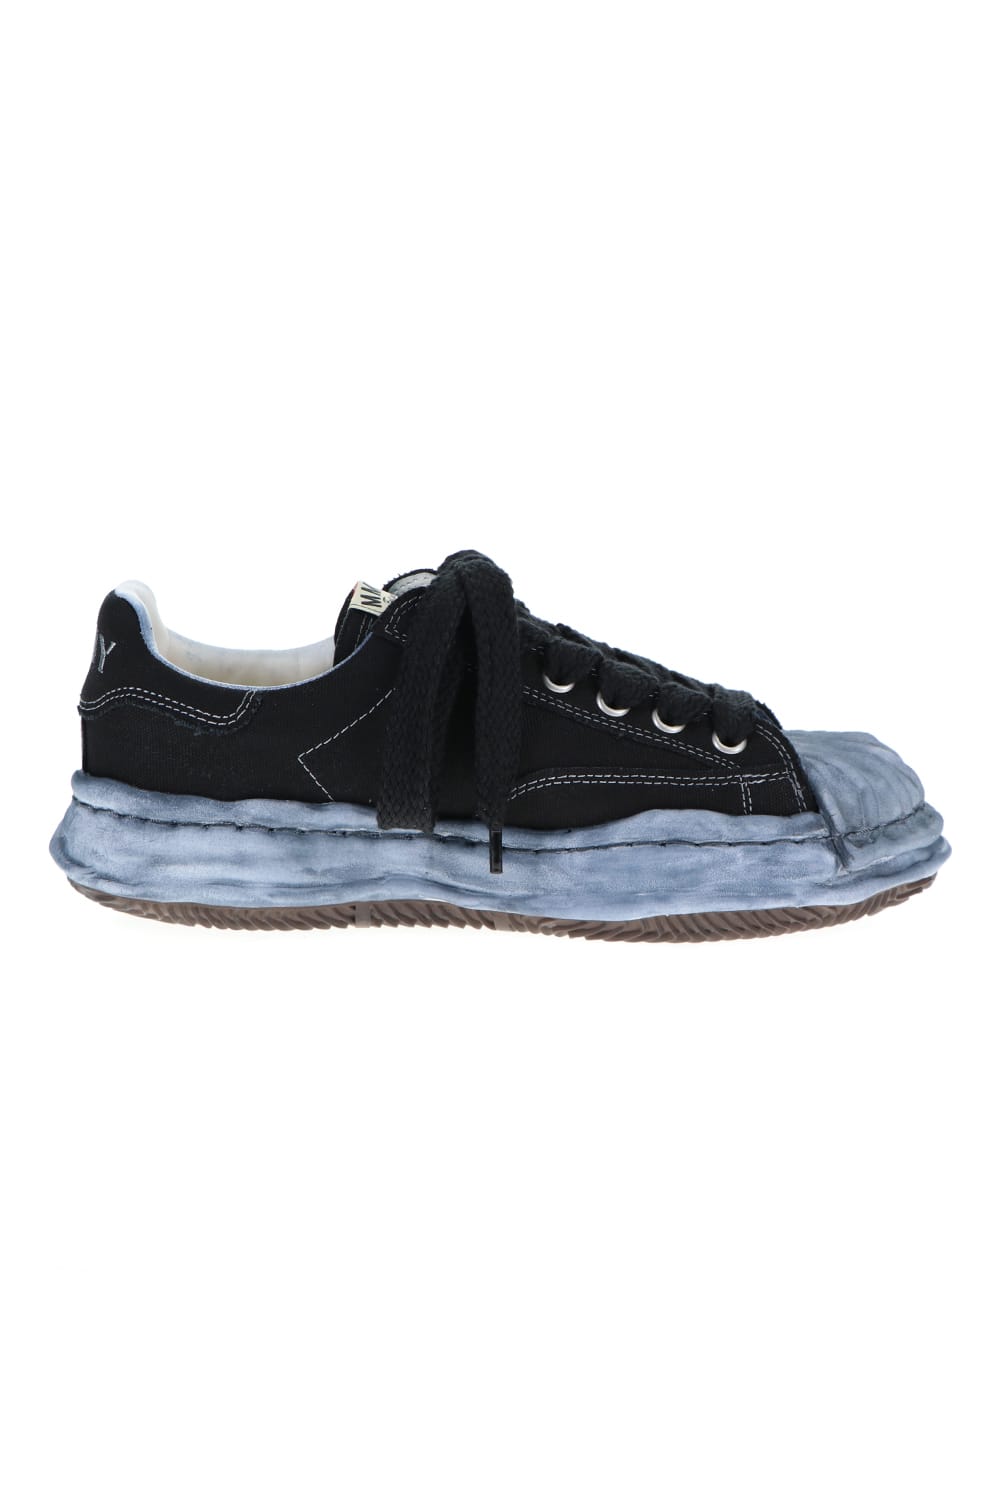 -BLAKEY Low- Original STC sole over dyed canvas Low-Top sneakers Black